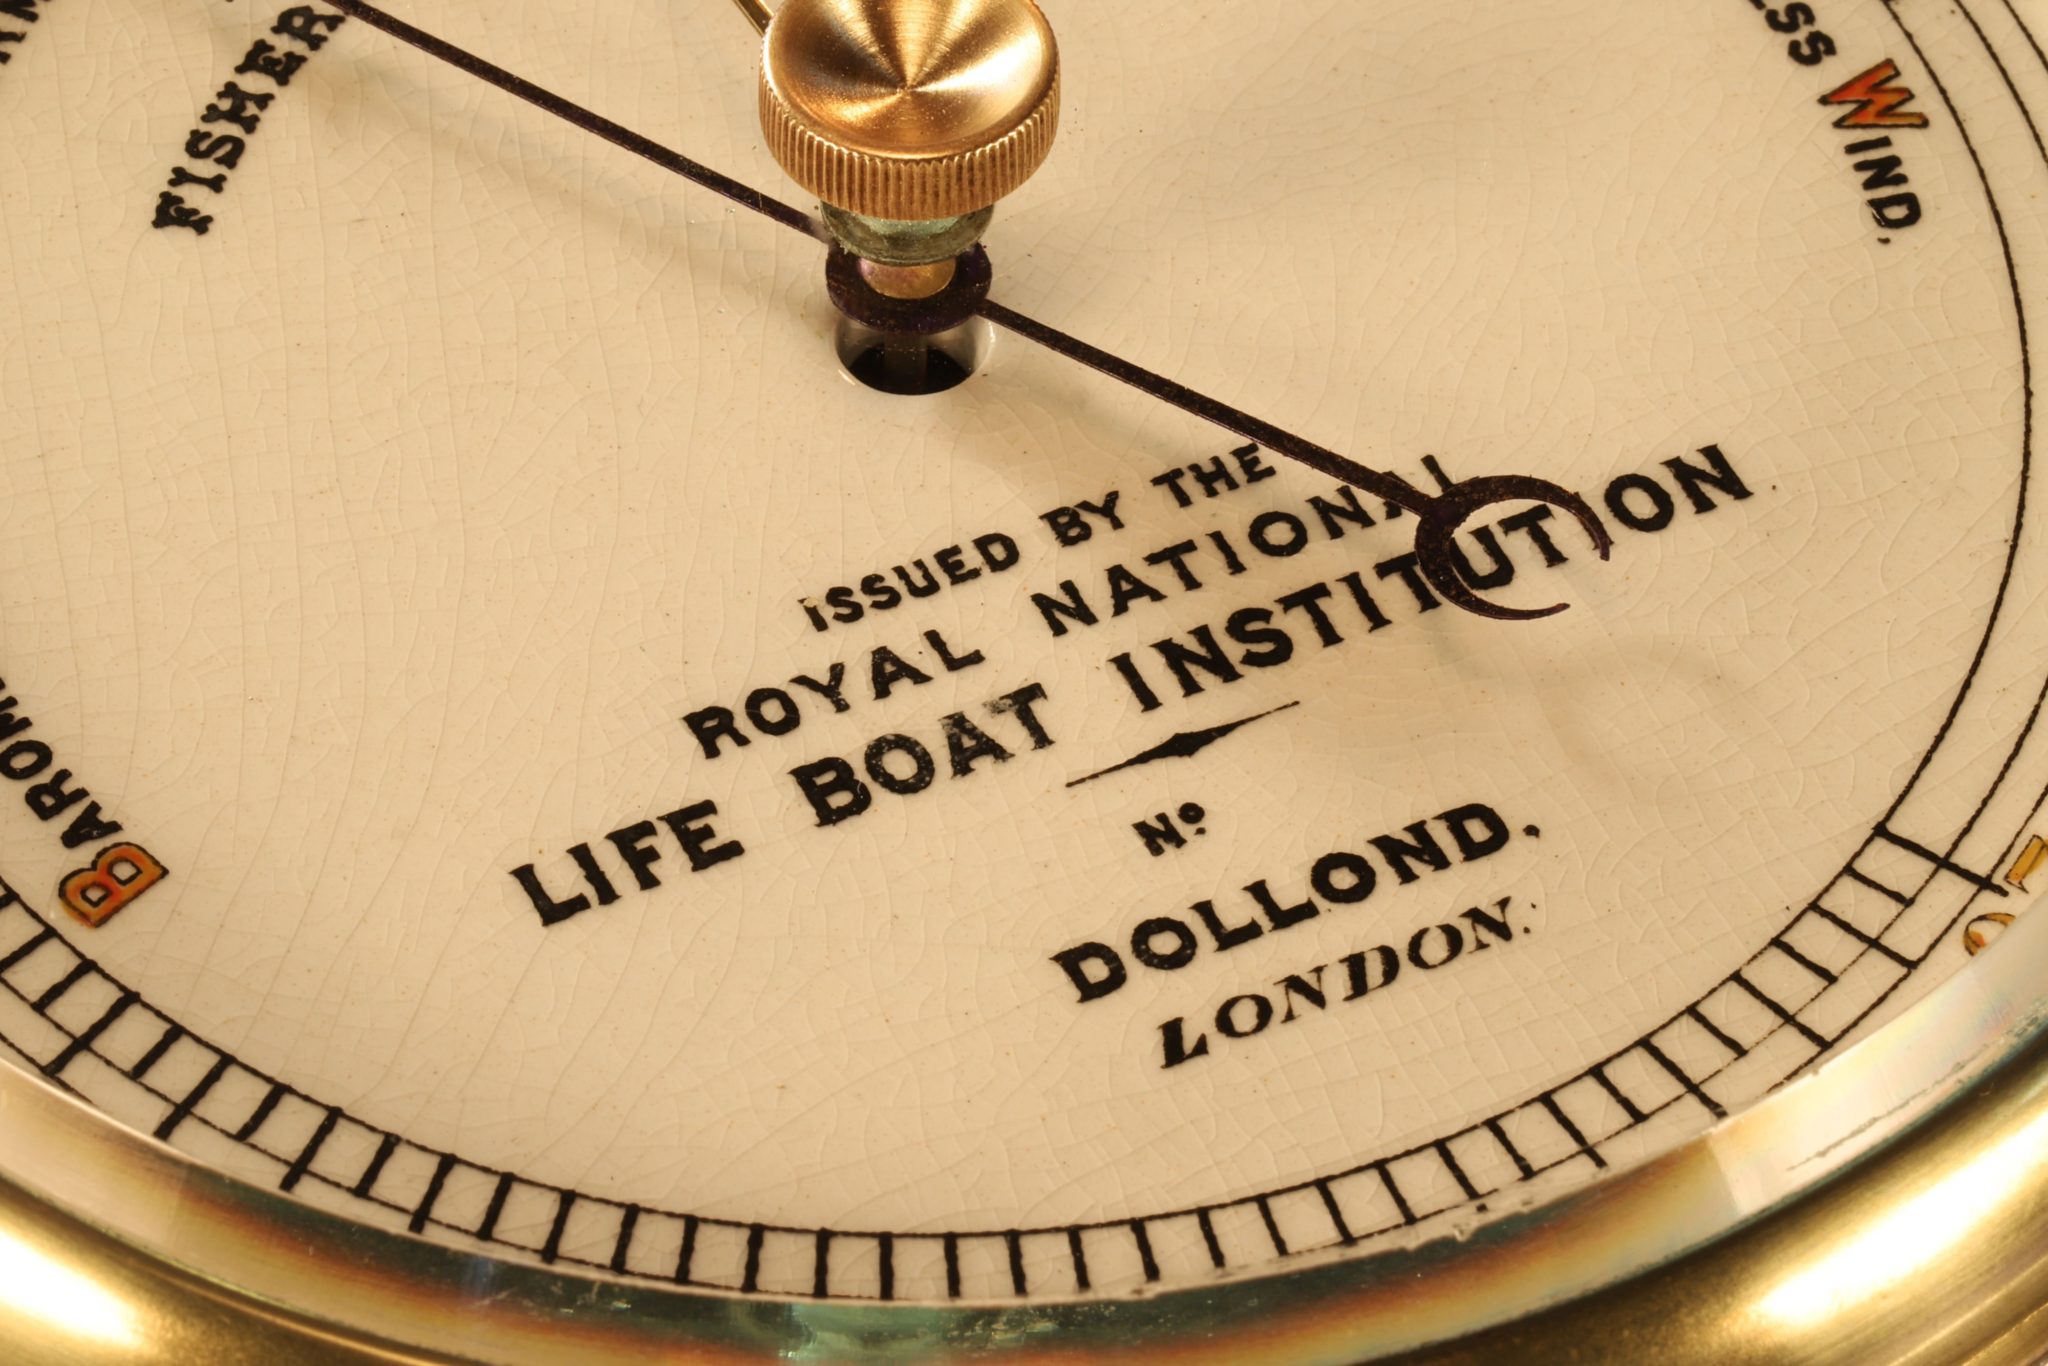 Image of RNLI Fishermans Aneroid Barometer by Dollond c1890